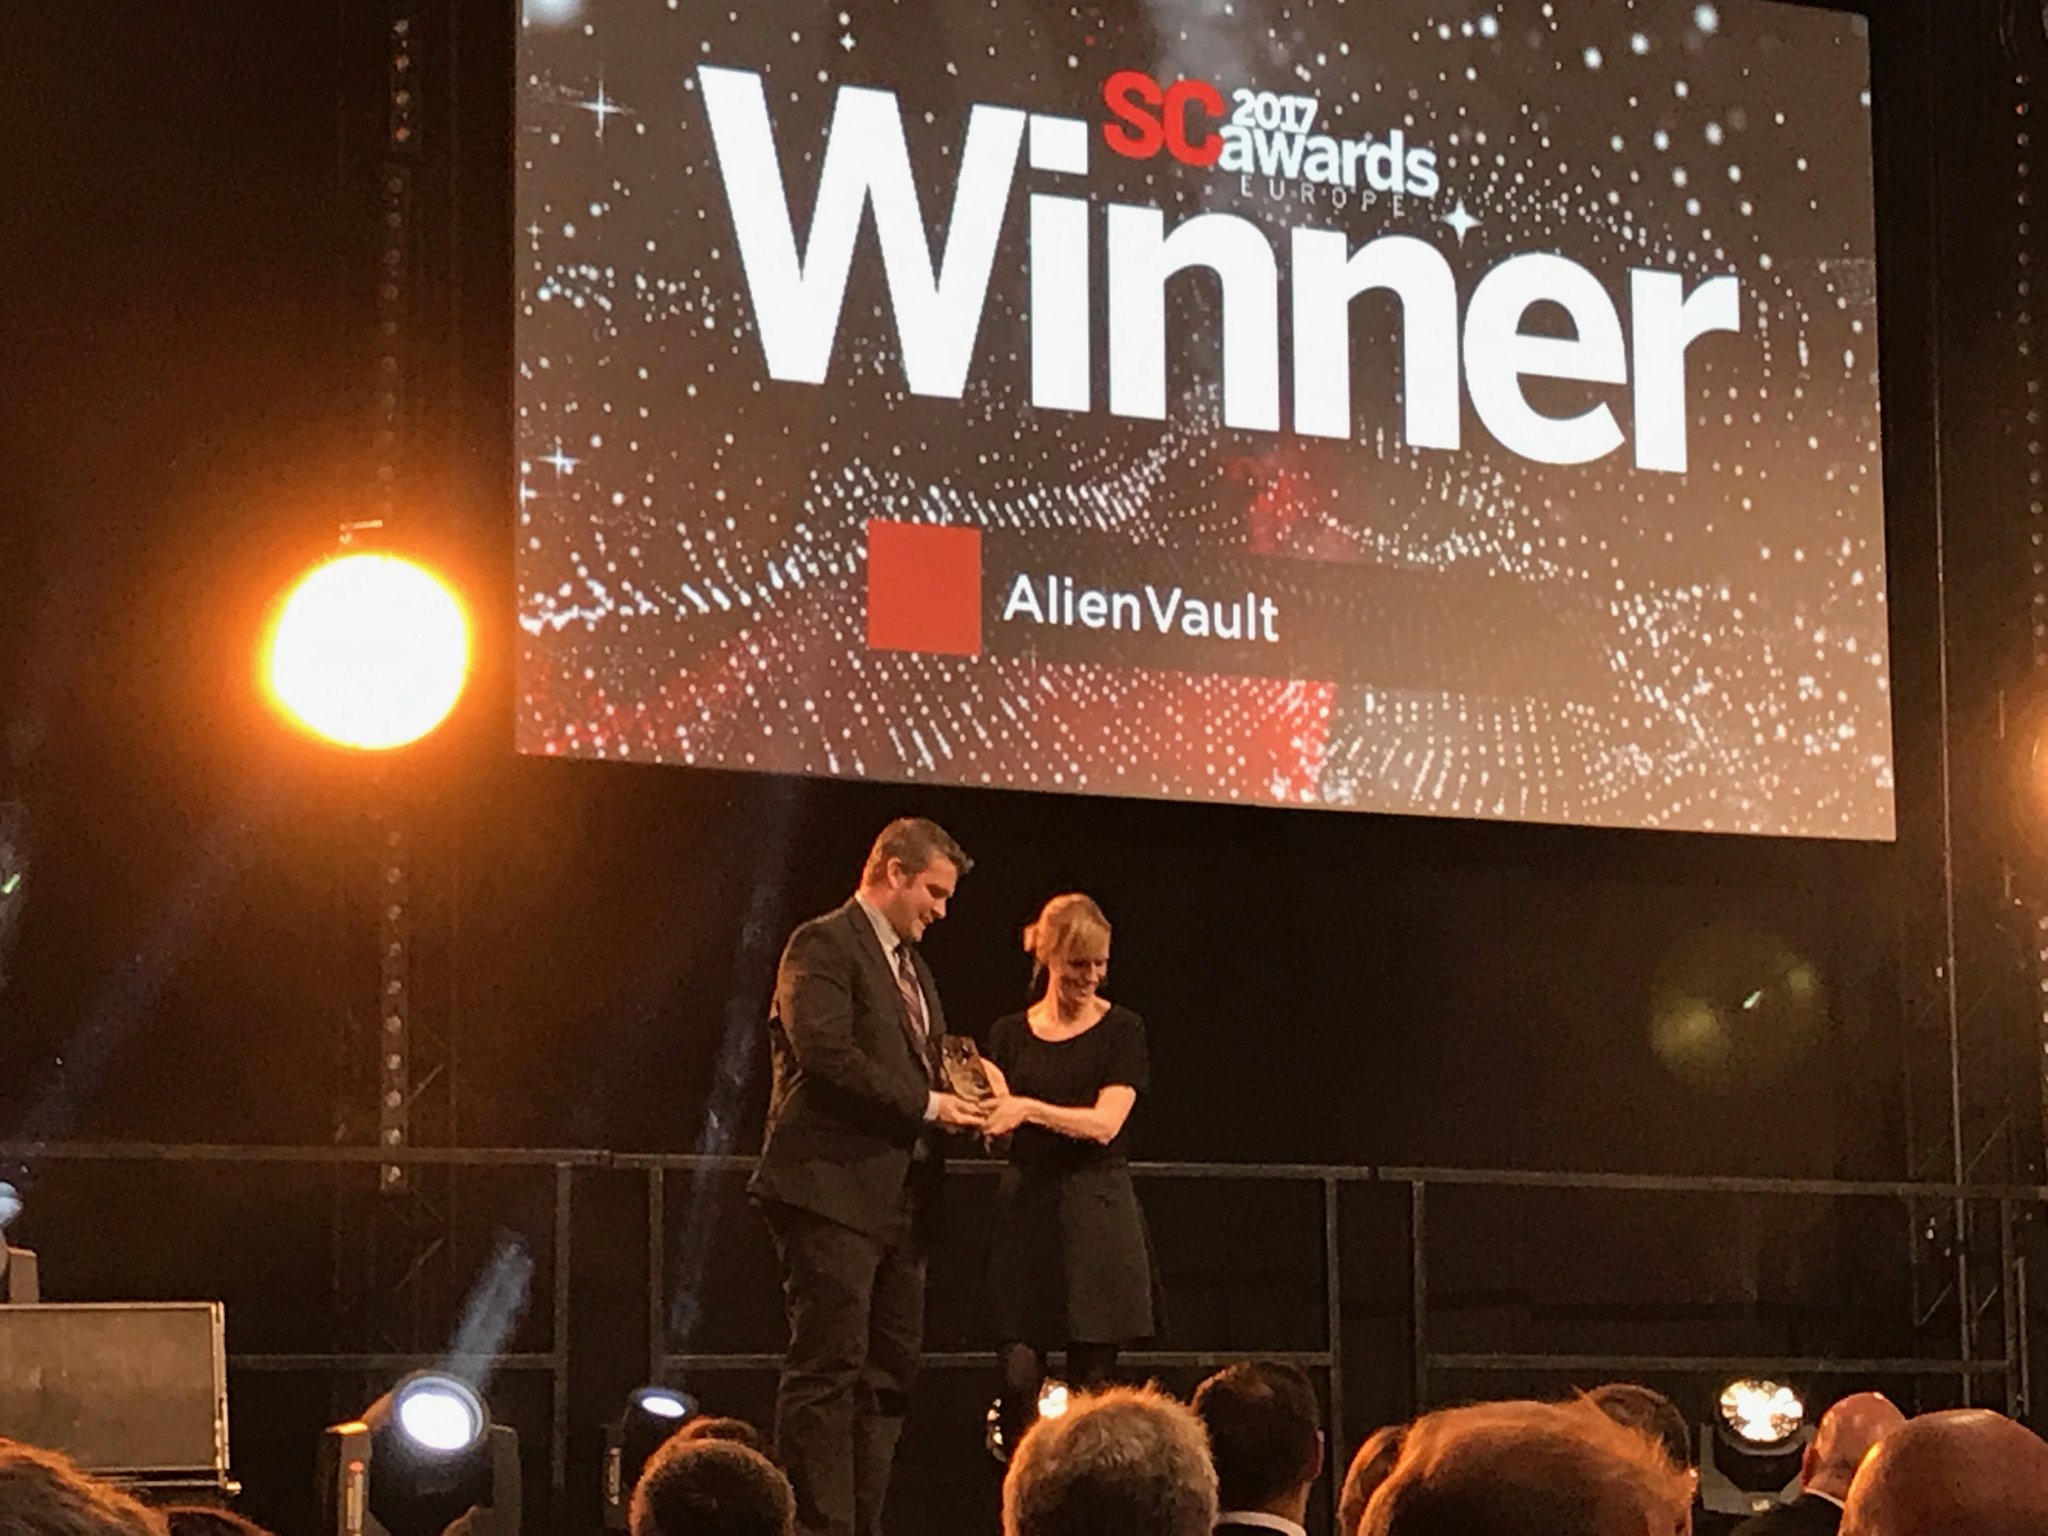 At T Cybersecurity On An Amazing Win For Alienvault Usm